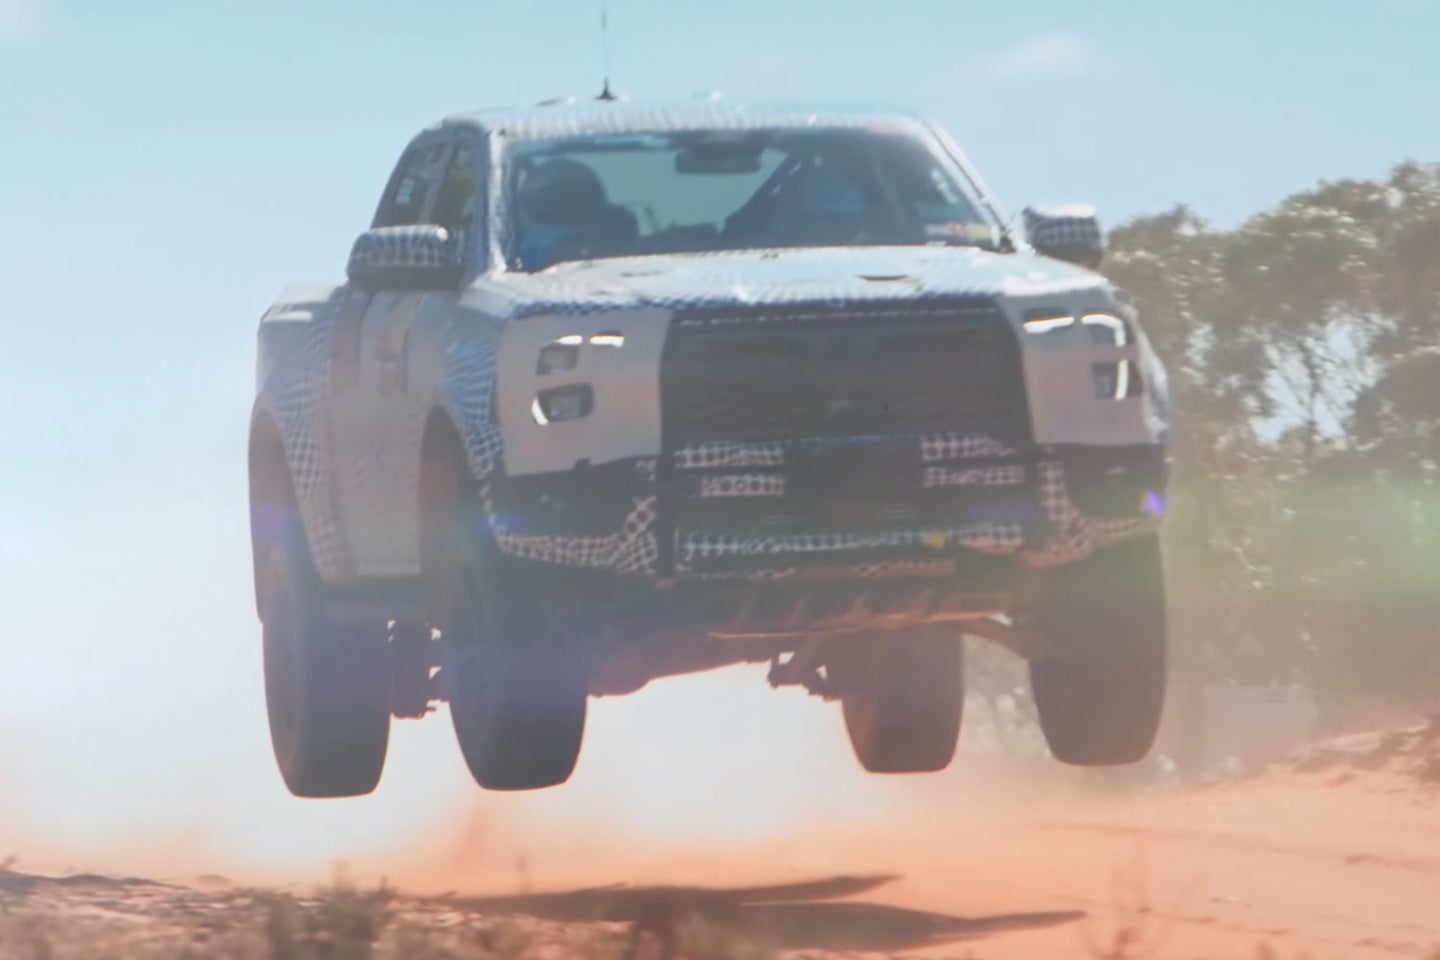 2023 Ford Ranger Raptor Teased as Most Powerful Ranger Ever Ahead of Reveal